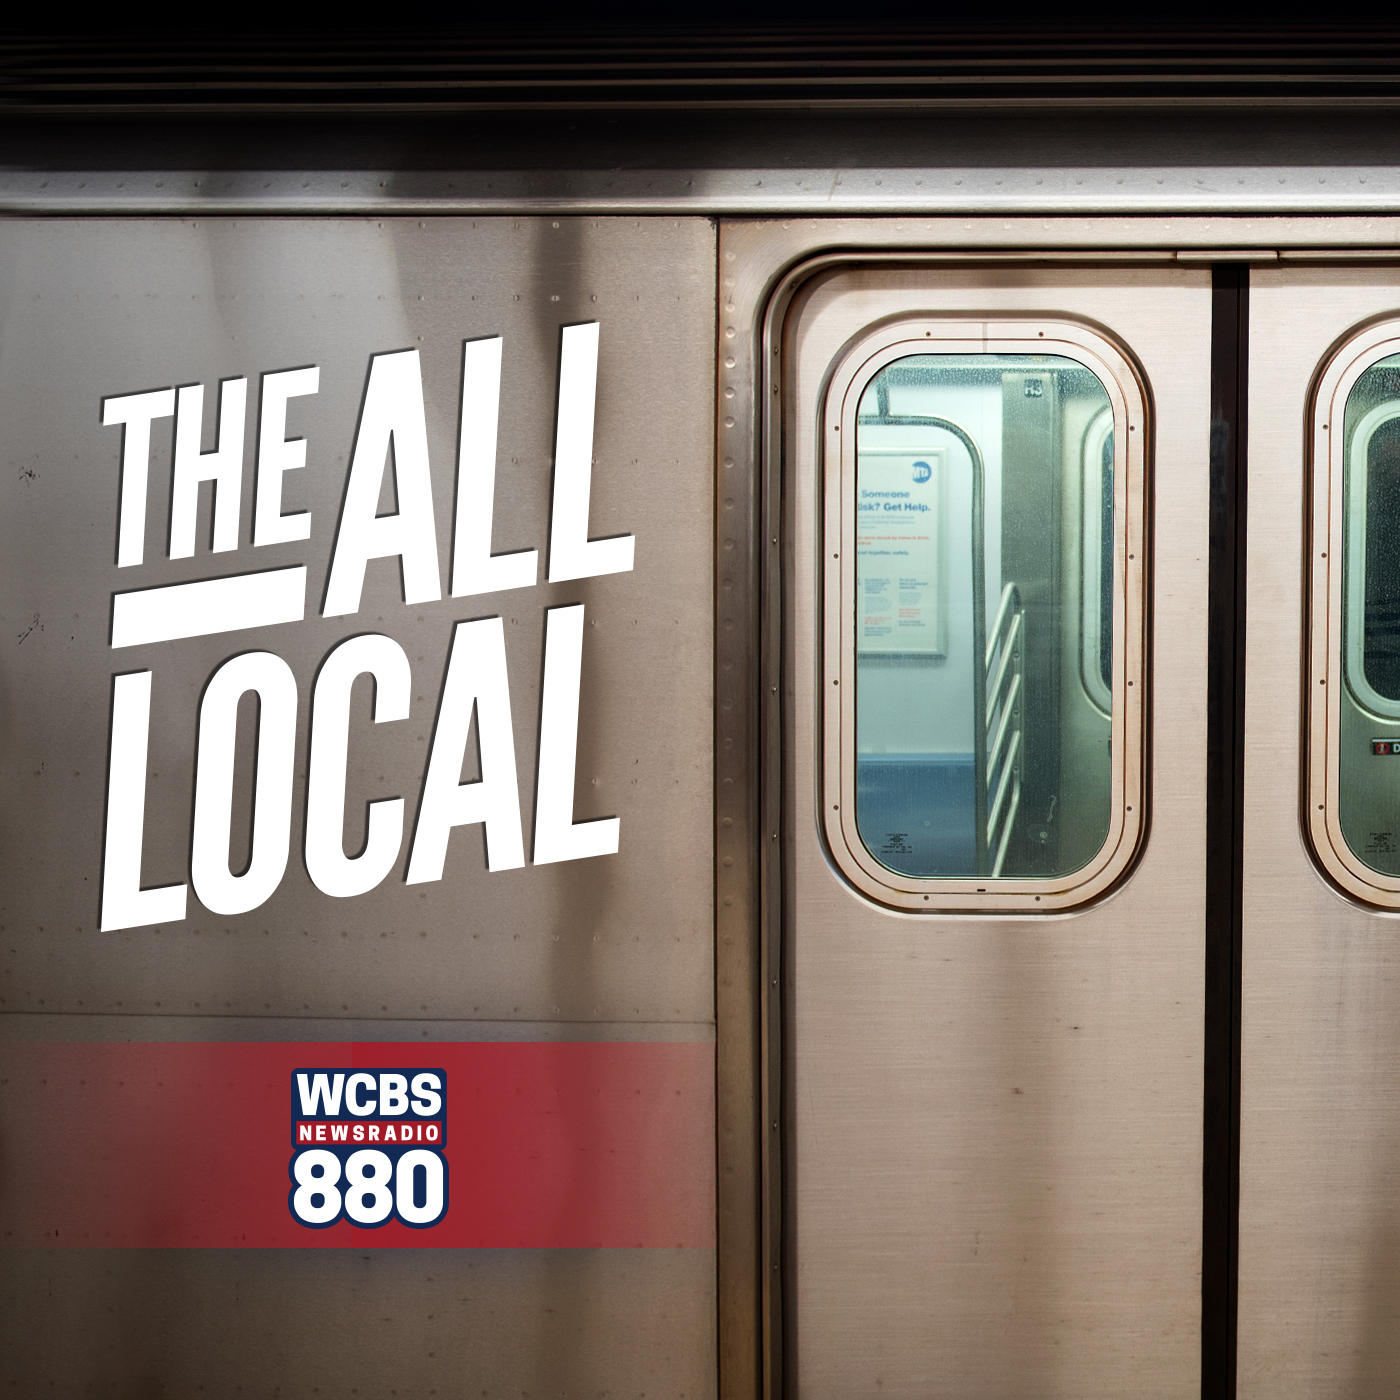 Expect delays at Penn Station after wires went down last night, AAA predicting busiest weekend on the road in over two decades this Memorial Day weekend, and Donald Trump to rally in South Bronx